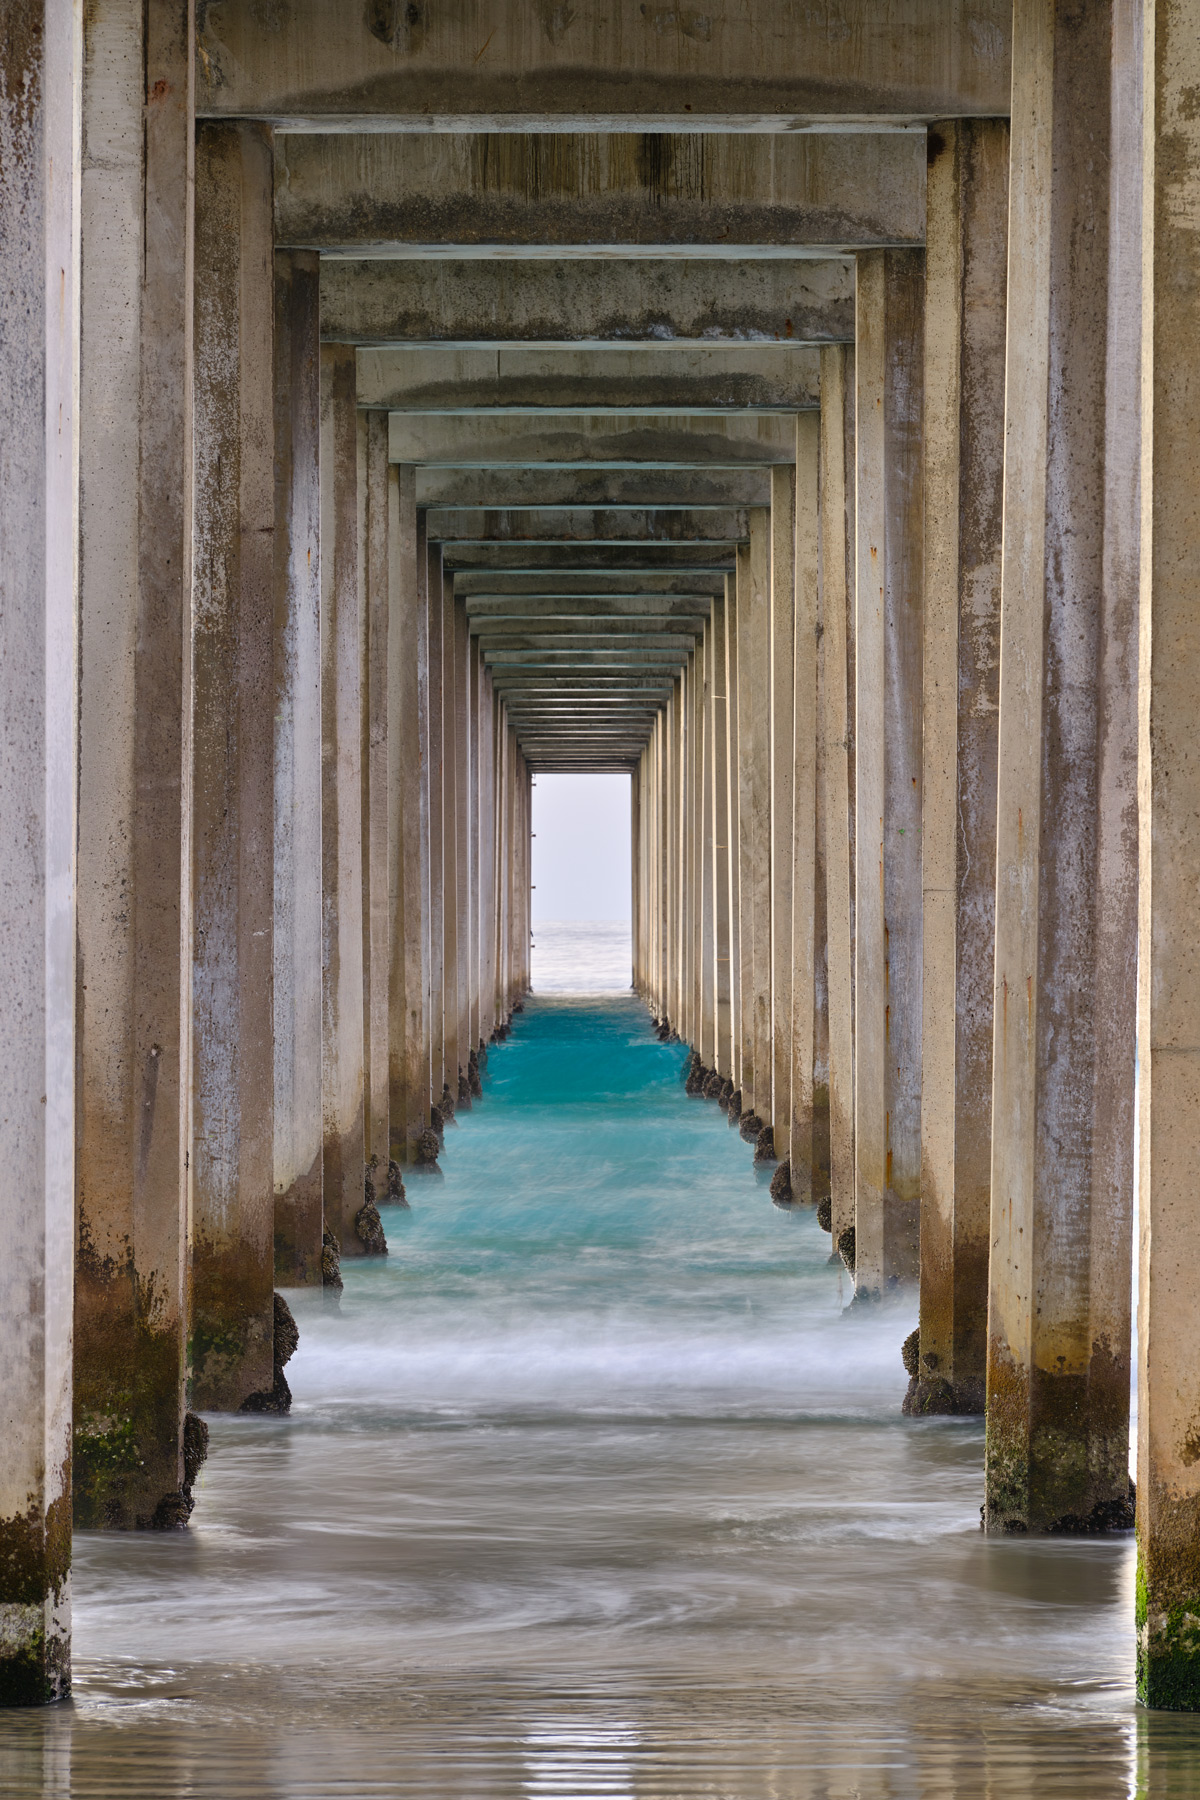 an abstract view looking down Scripps Pier in La Jolla, California near San Diego showcasing the perfect columns and blue water.  Photo by Andrew Shoemaker